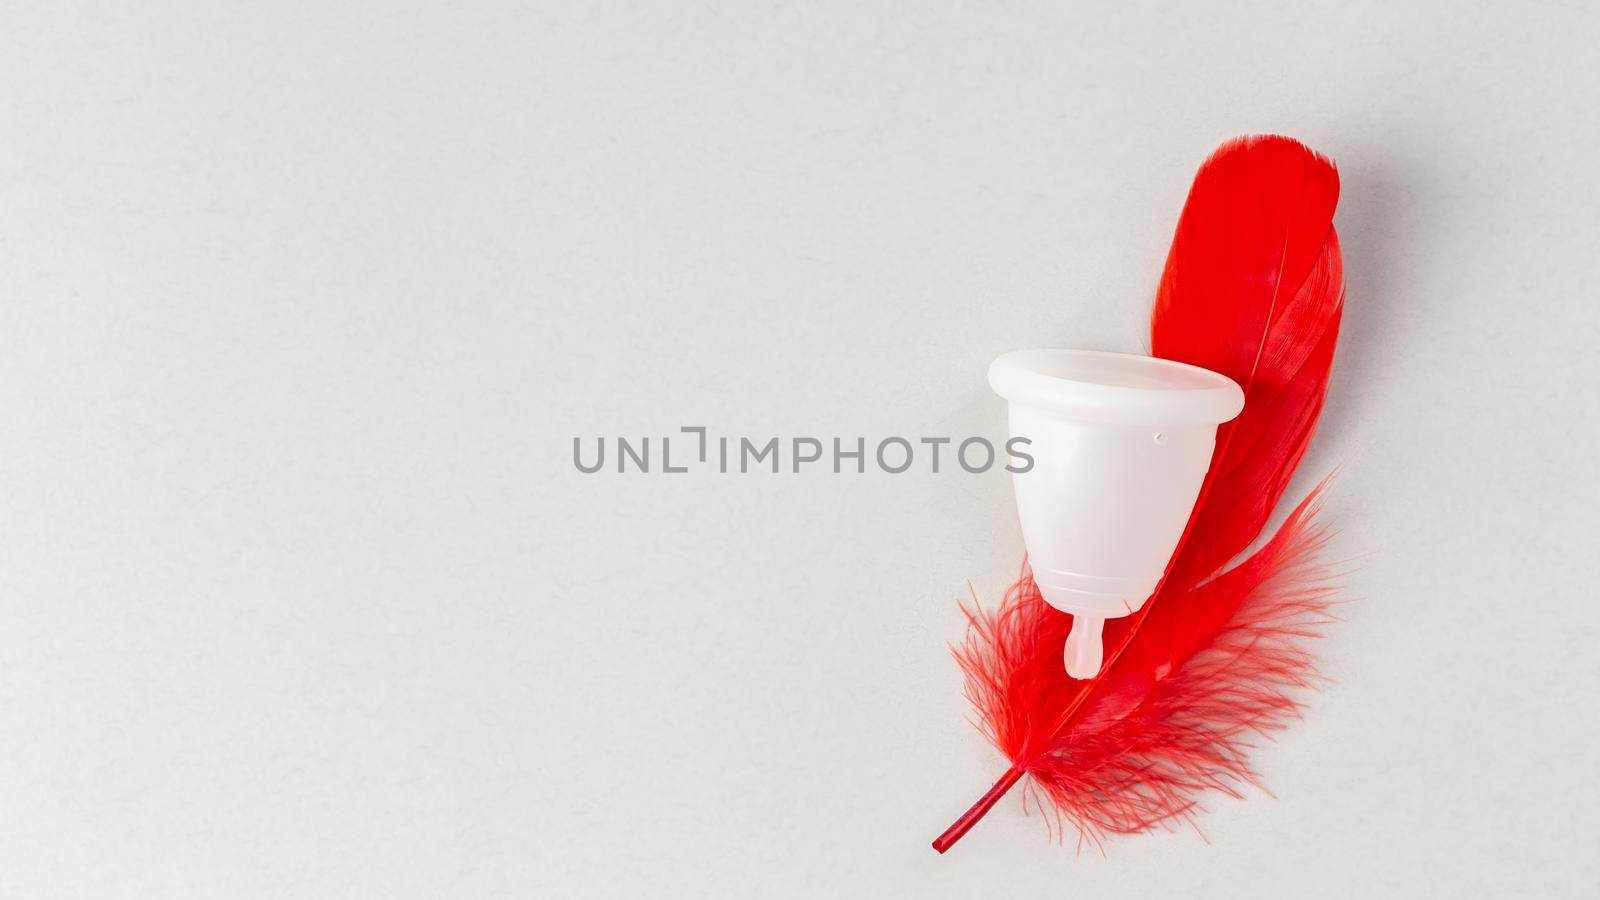 Menstrual cup with red feather over grey background. Periods hygiene product, zero waste alternatives